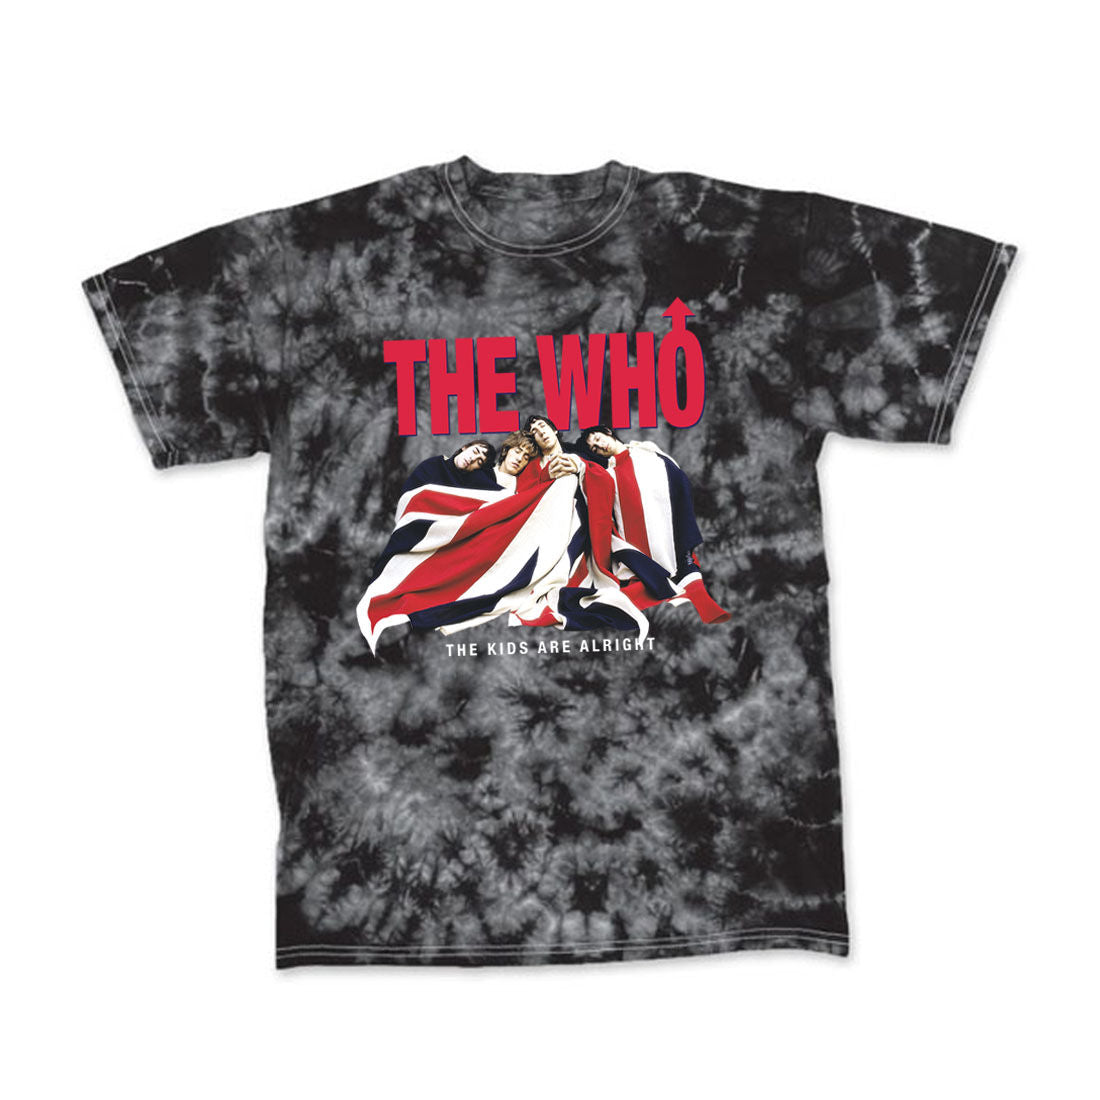 The Who - THE KIDS ARE ALRIGHT TIE DYE T-Shirt